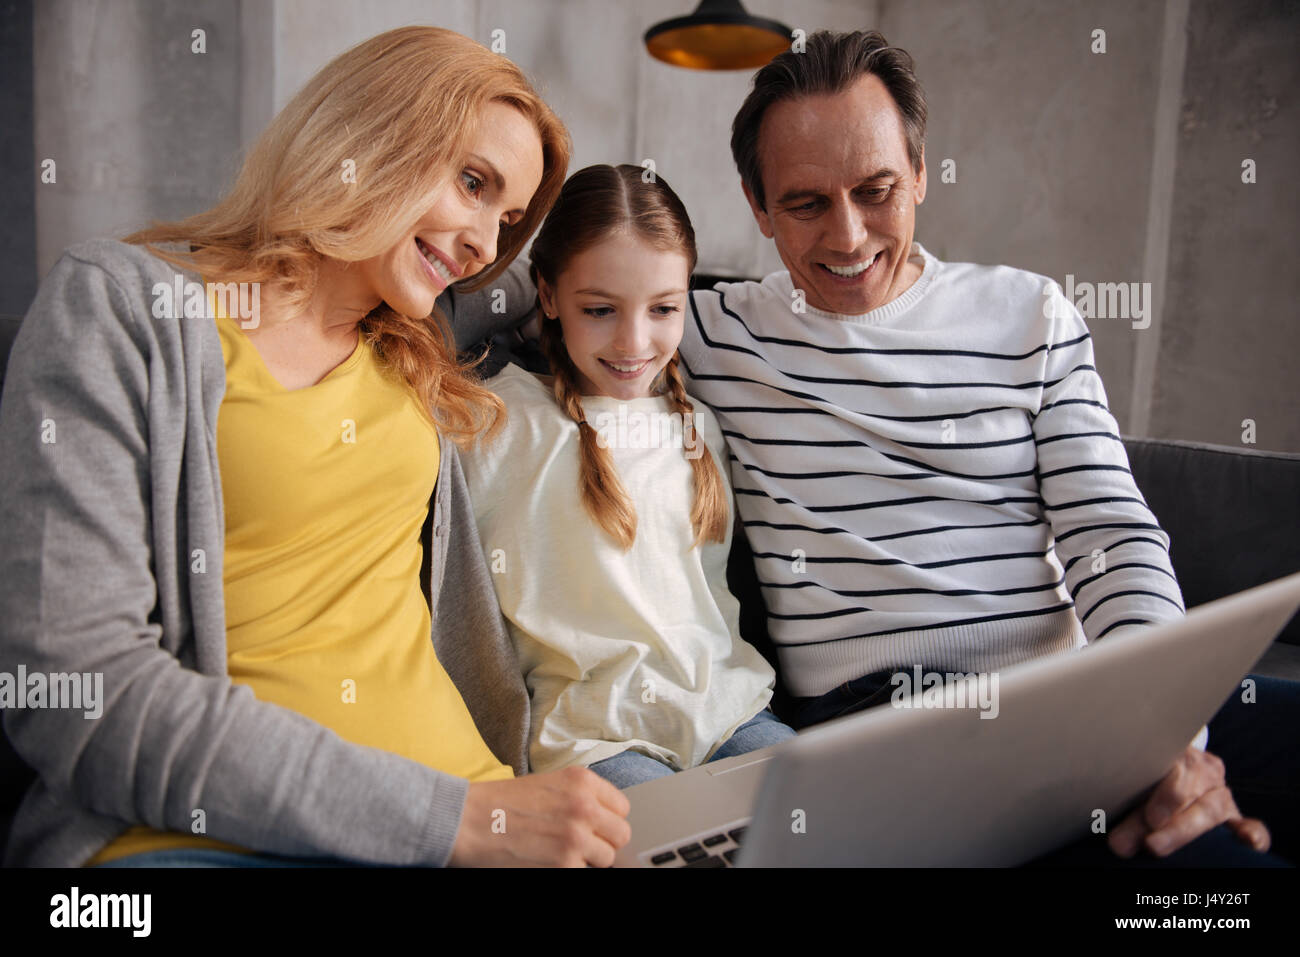 Amused family using laptop at home Stock Photo